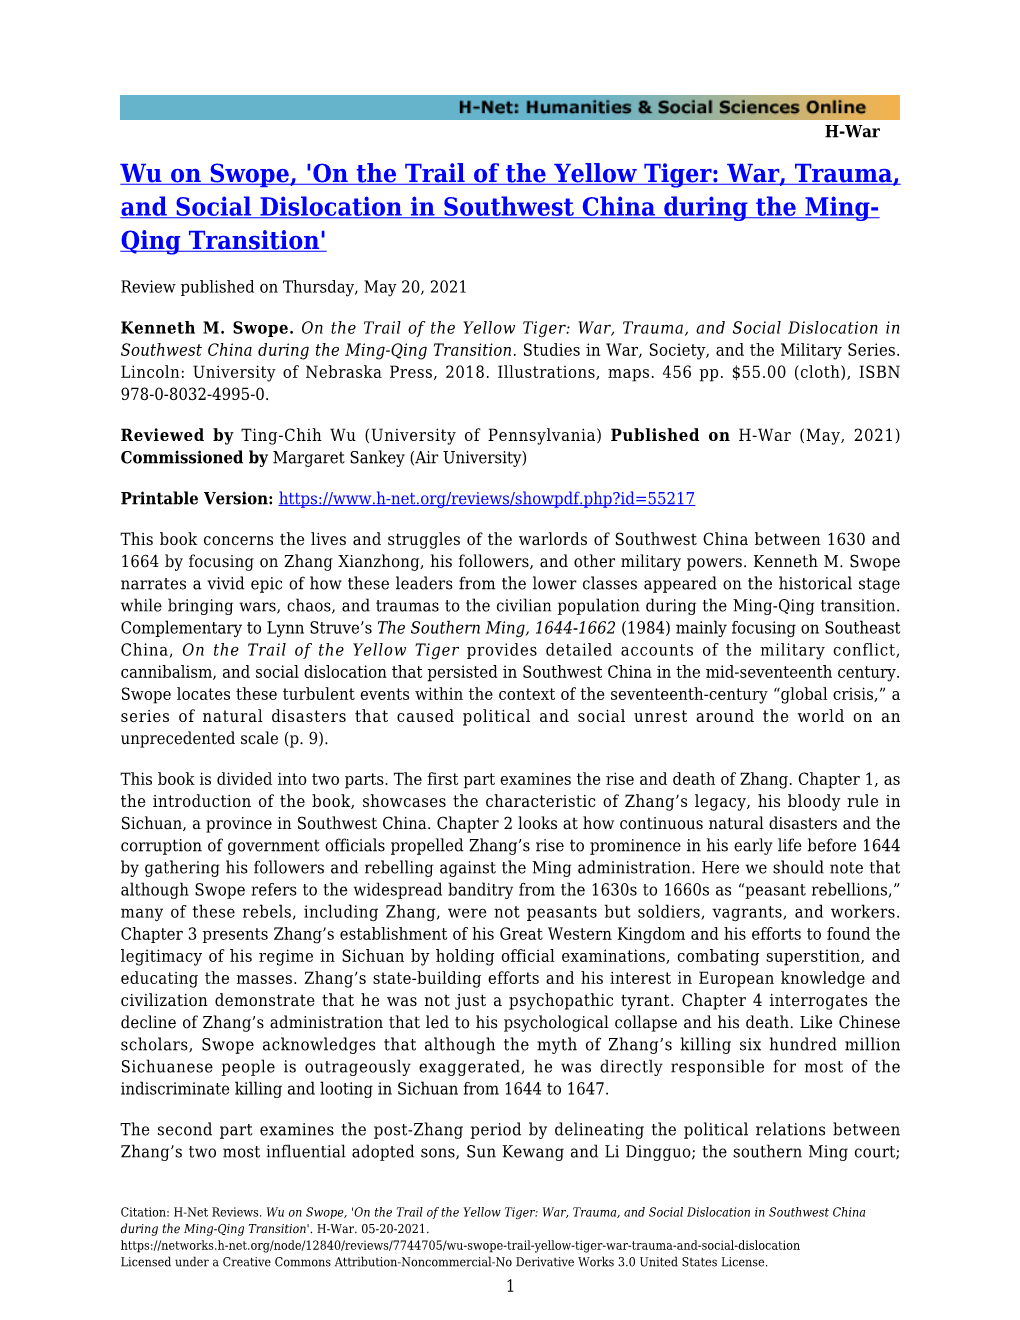 On the Trail of the Yellow Tiger: War, Trauma, and Social Dislocation in Southwest China During the Ming- Qing Transition'